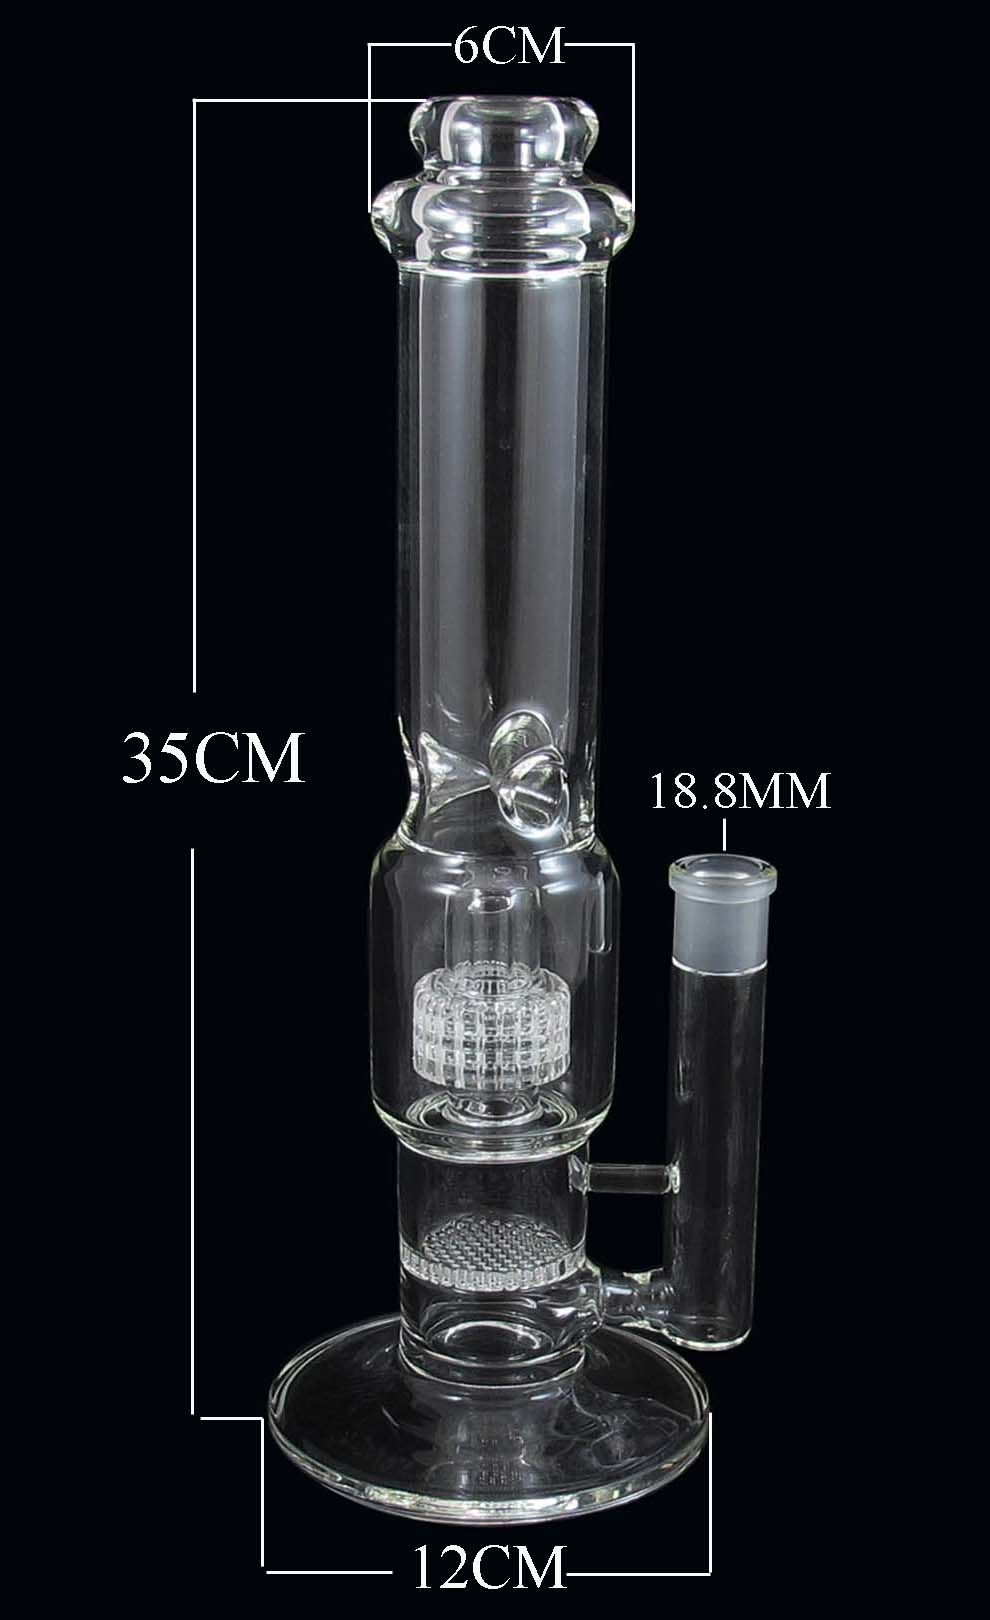 YQ-42%20two%20function%20glass%20water%20pipe%20with%20honeycomb%20disk%20and%20birdcage%20perc.jpg